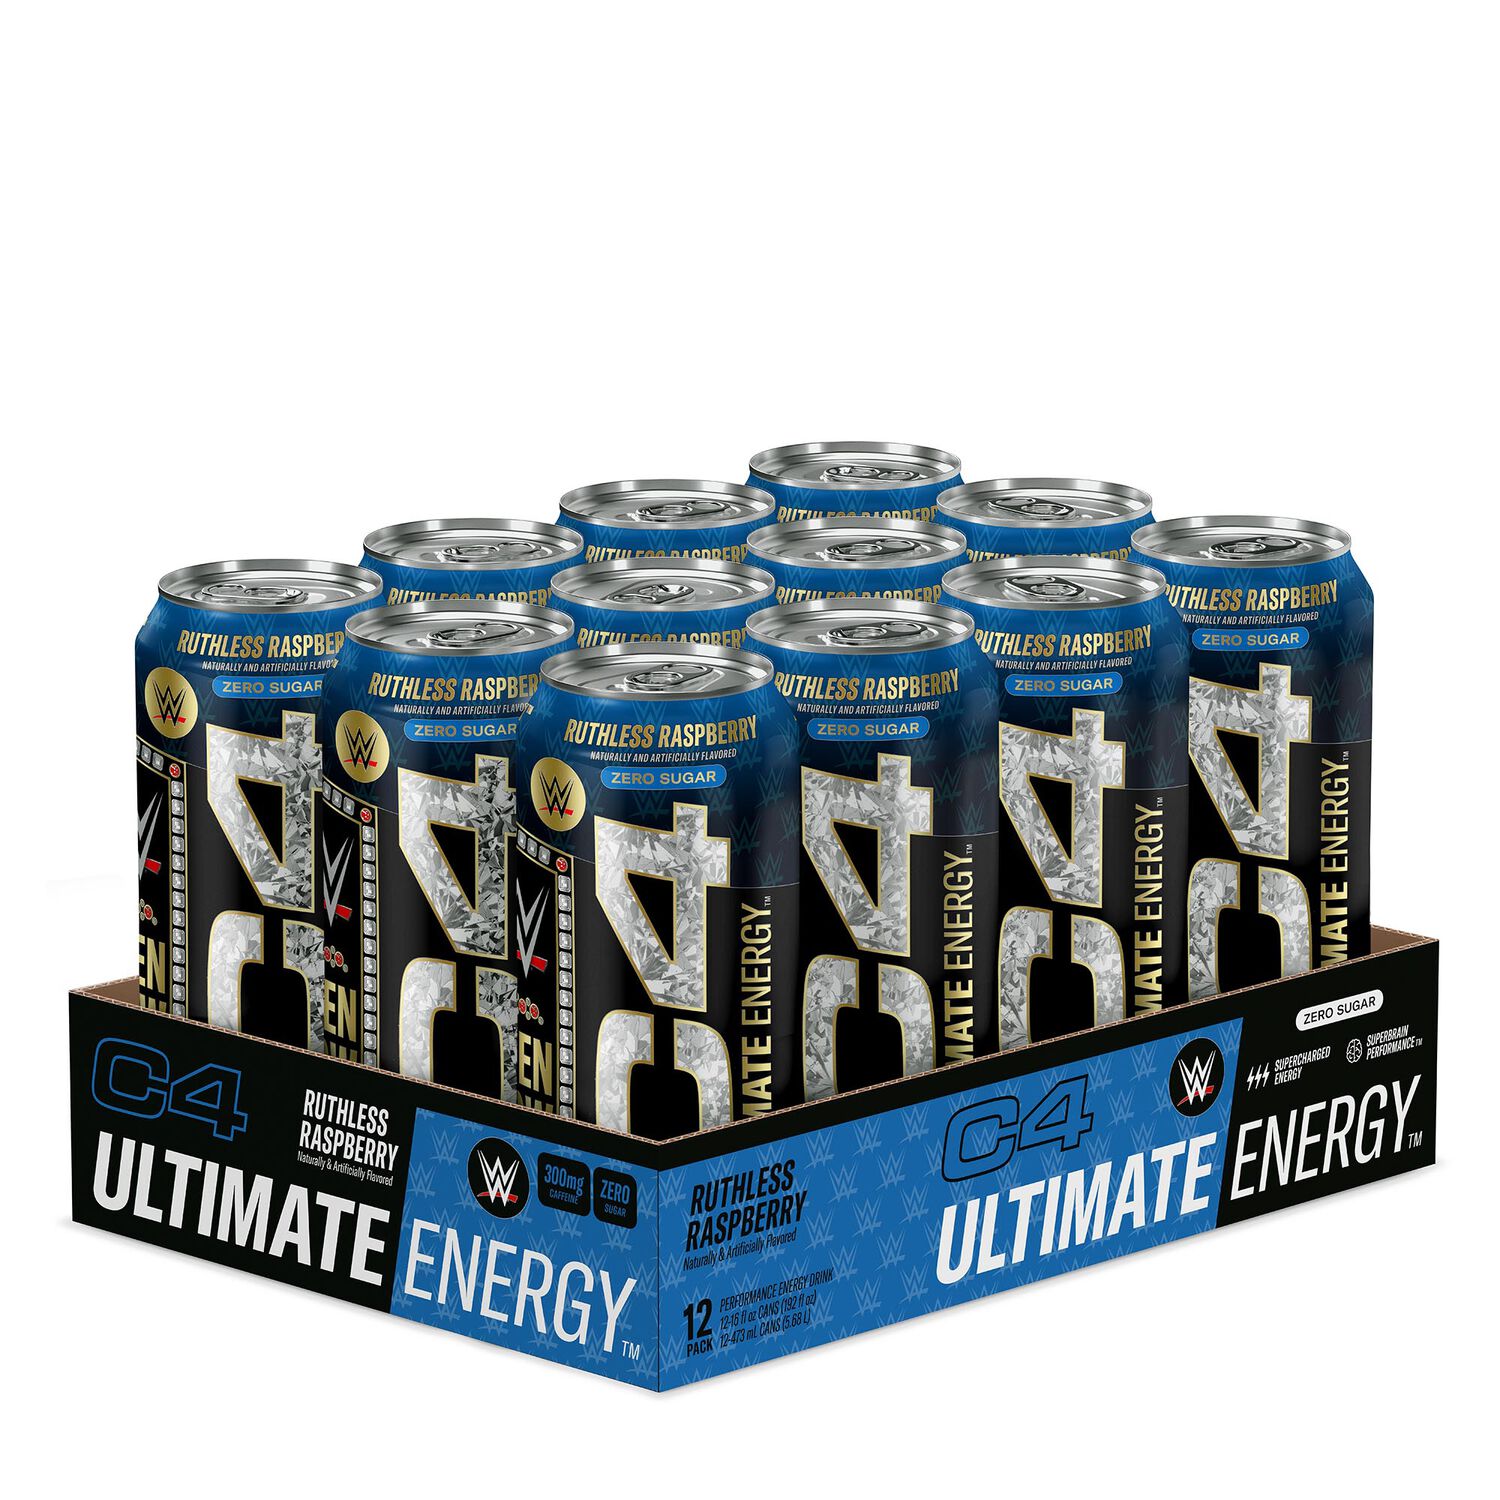 Cellucor C4 Ultimate Energy Drink - Ruthless Raspberry - 16Oz. (12 Cans) - Zero Sugar